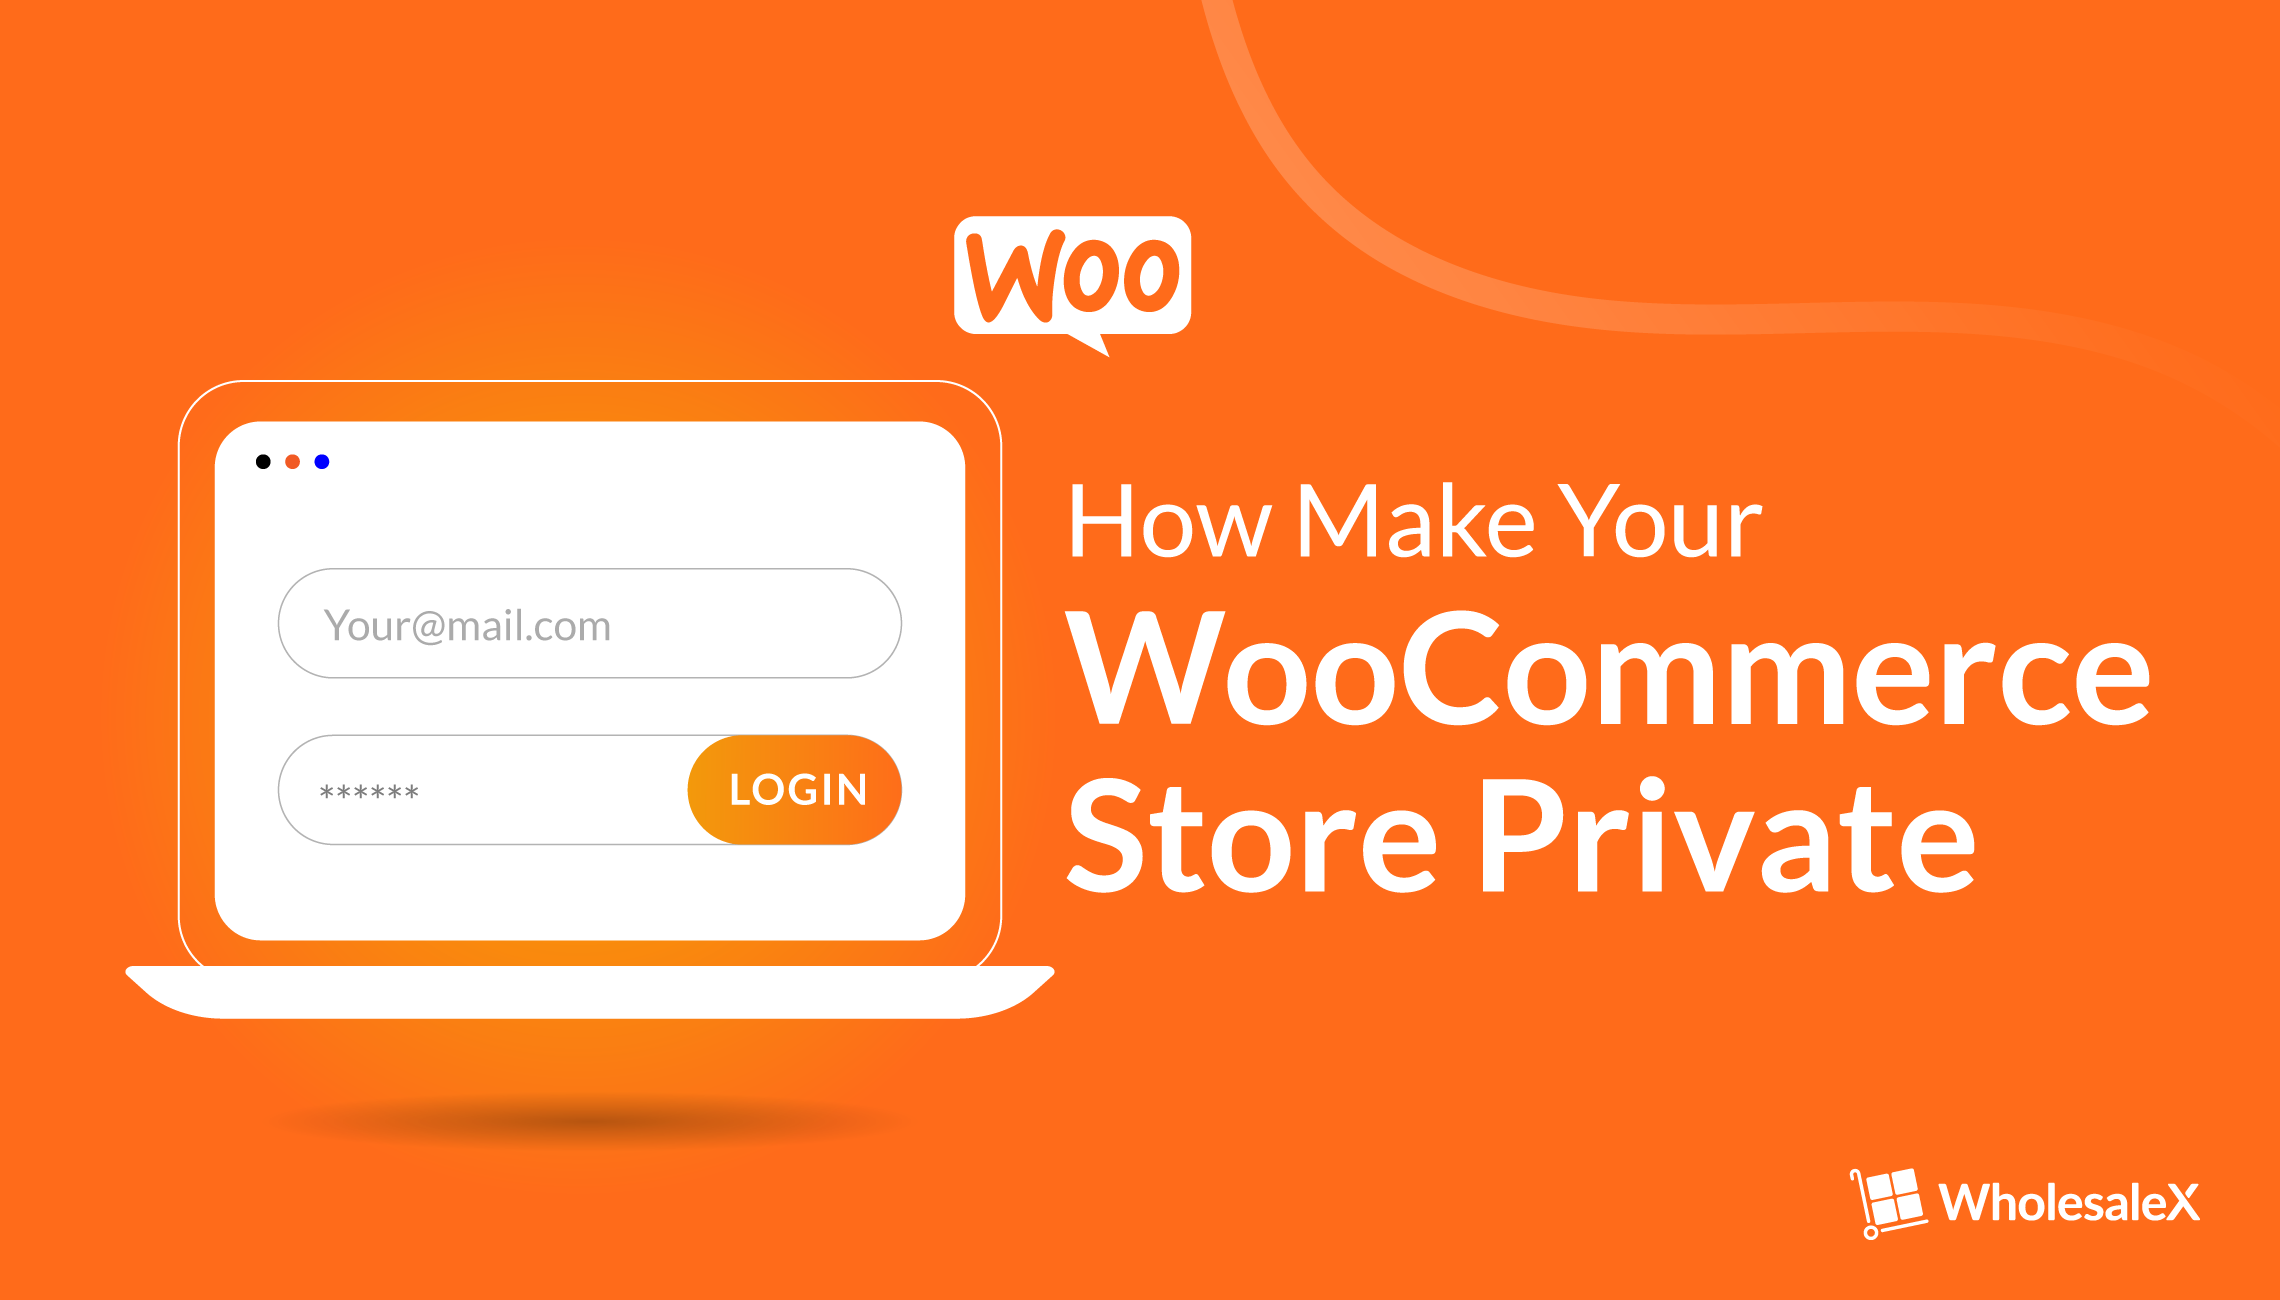 How to Make Your WooCommerce Store Private